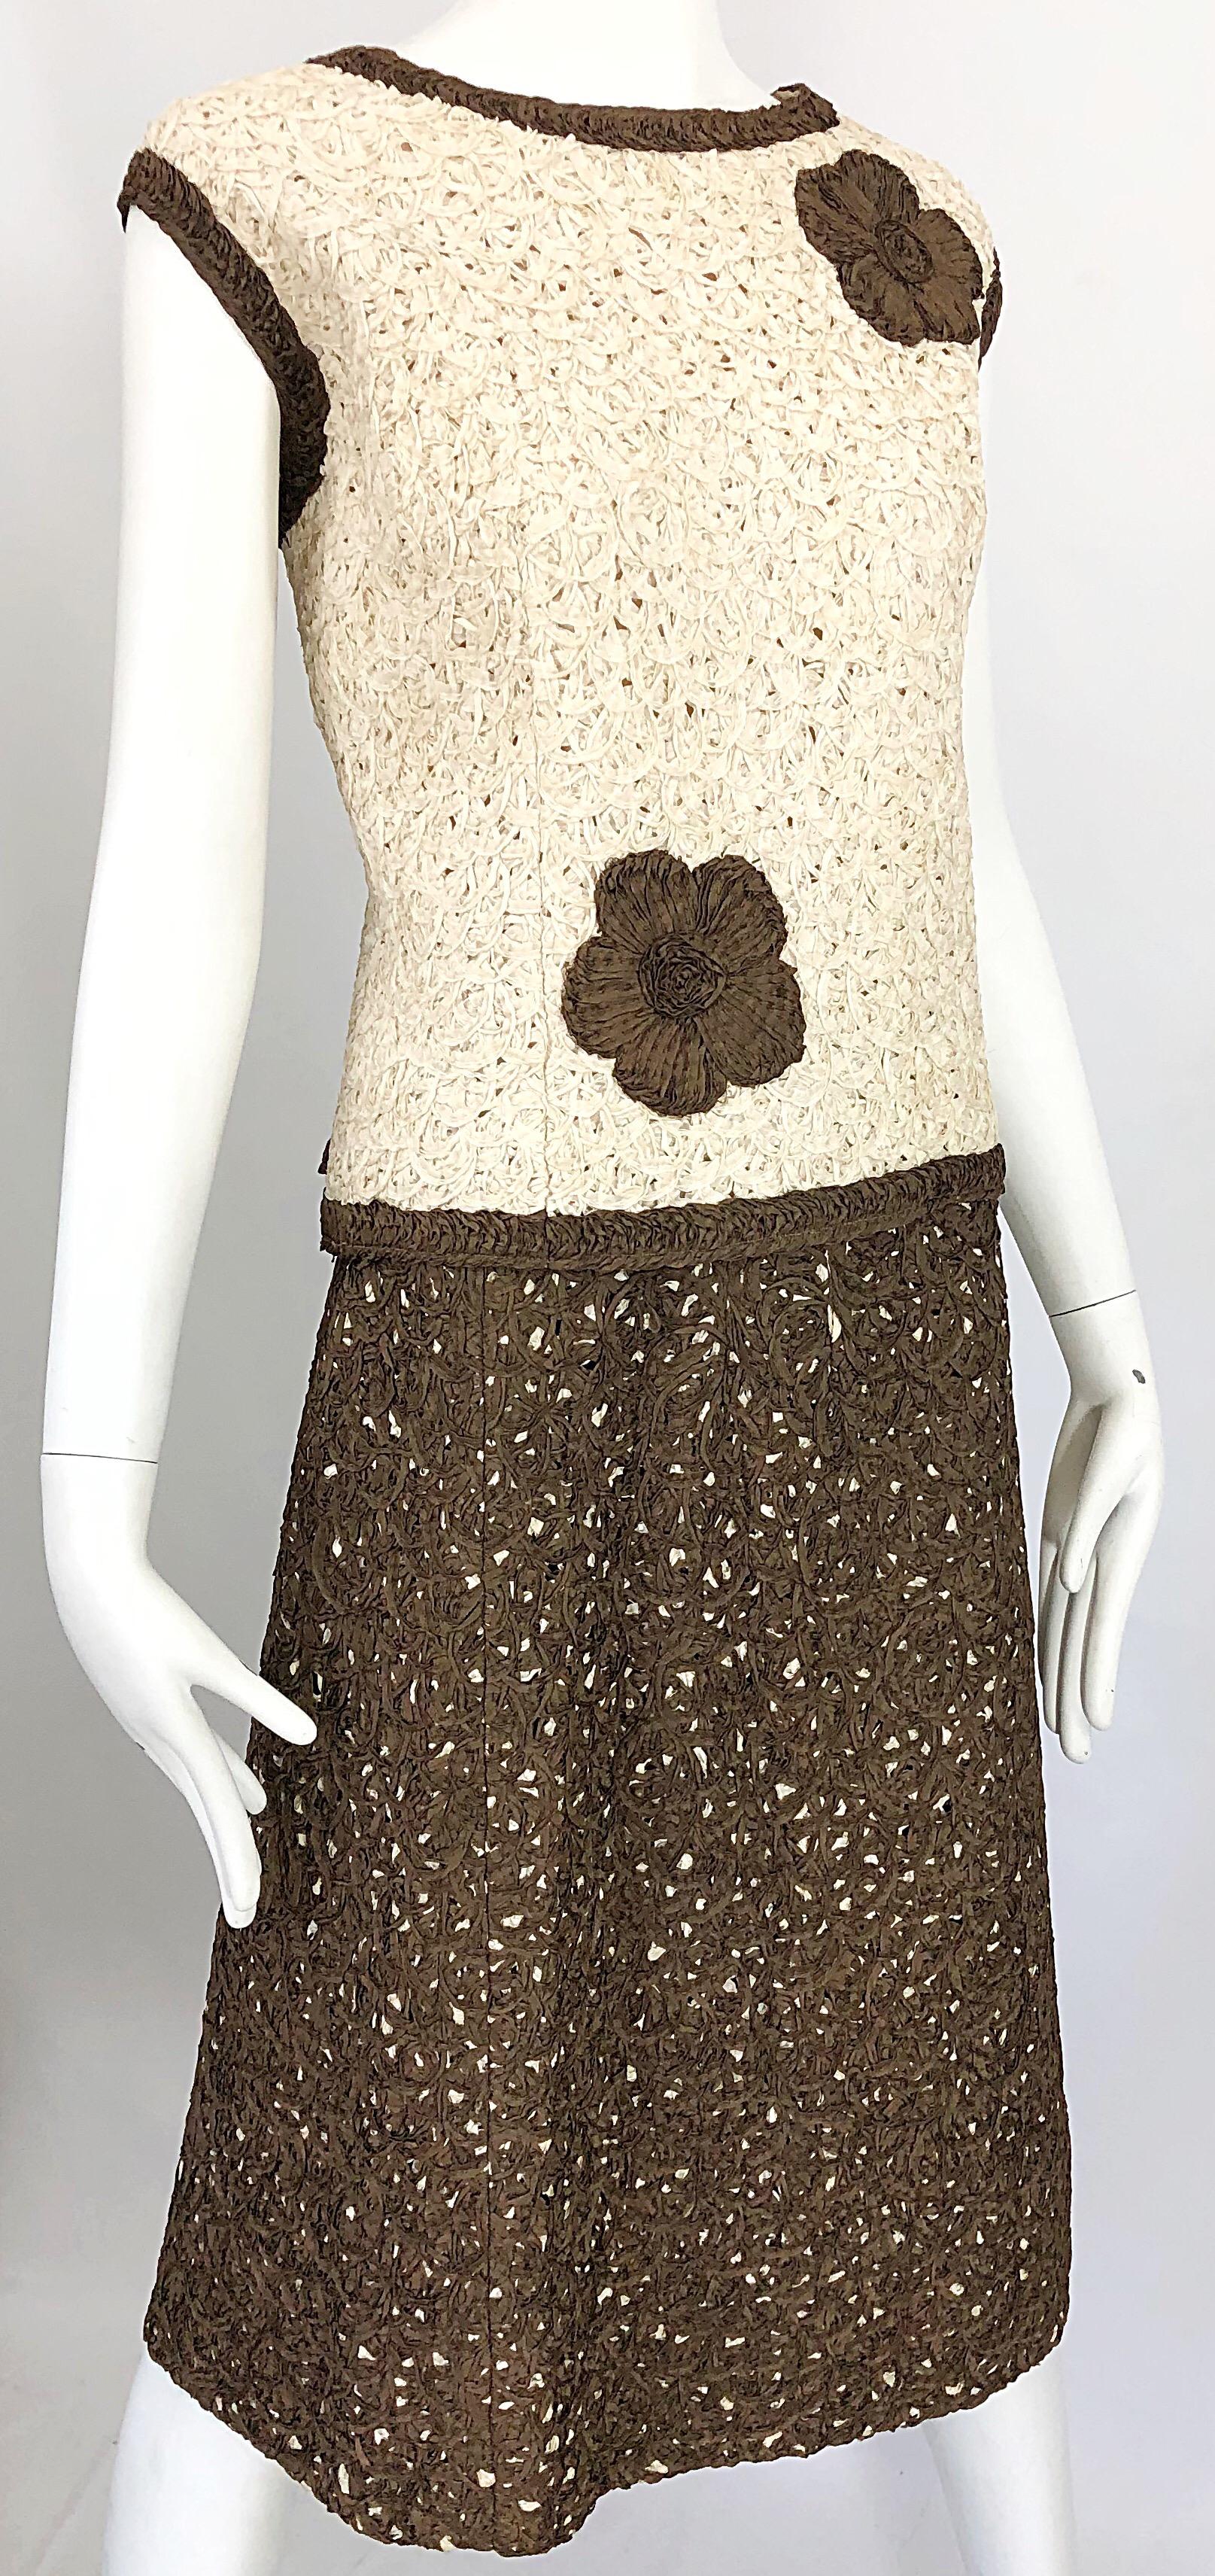 Women's 1960s Large Size Ivory + Brown Woven Ribbon Flower 60s Mod Shirt and Skirt Dress